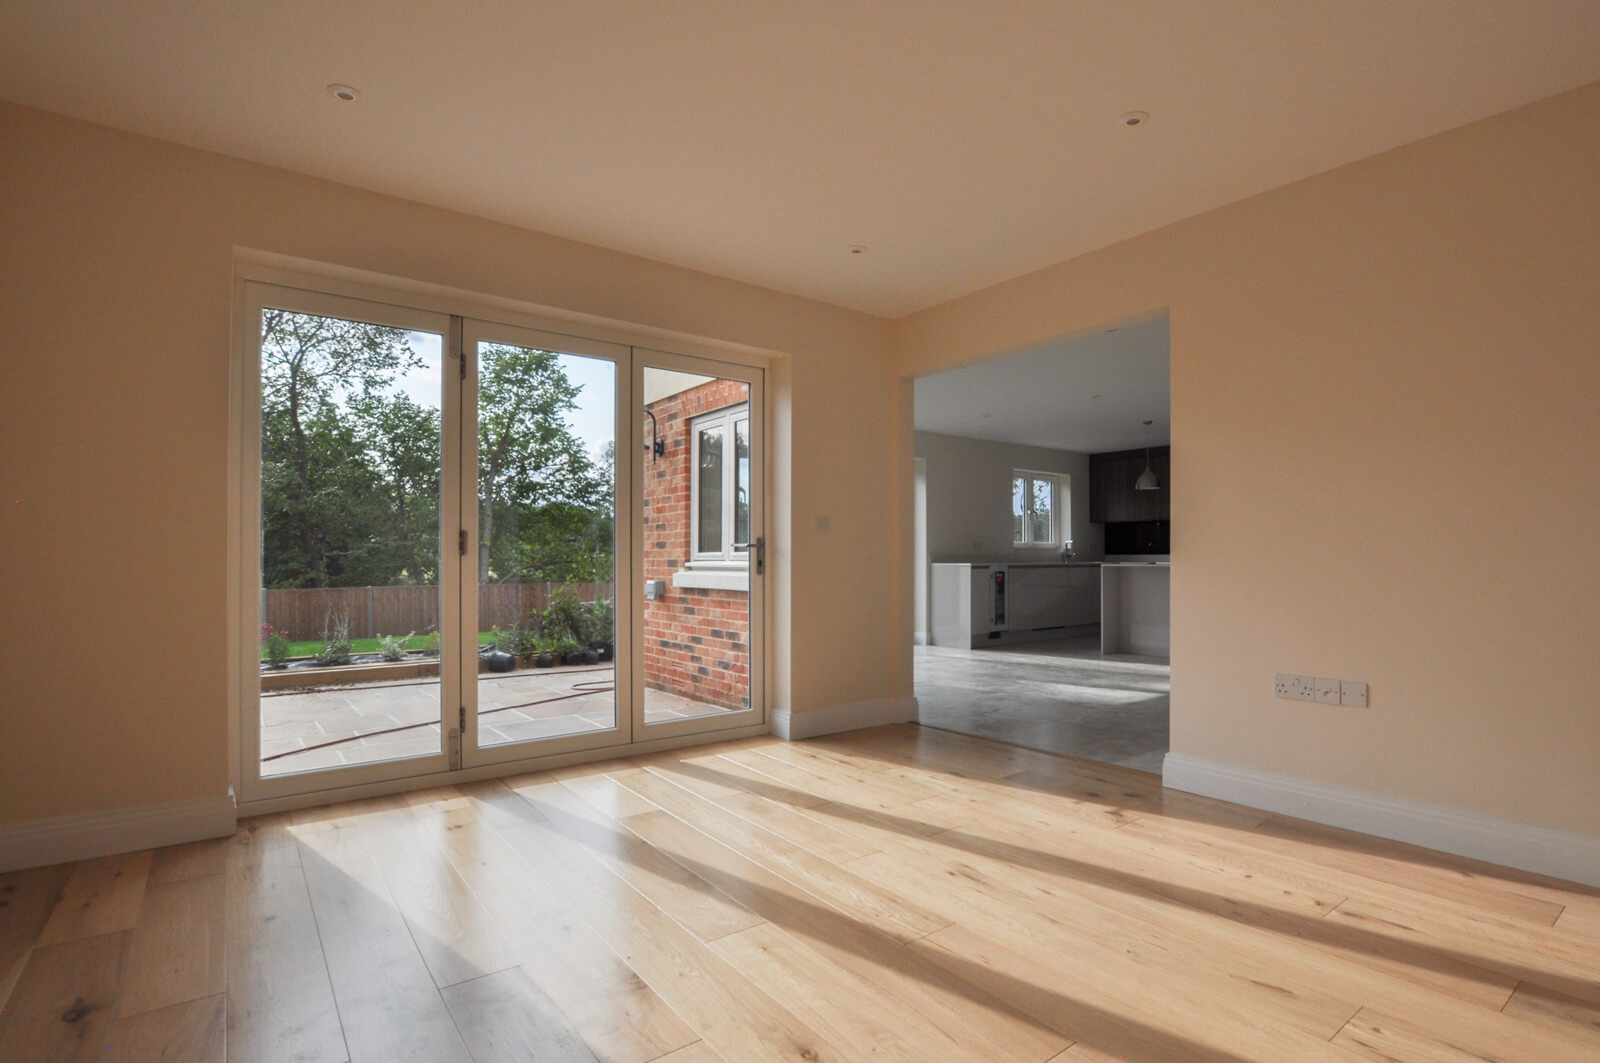 Living area with glass doors to the side patio and a passage way through to the open plan kitchen.